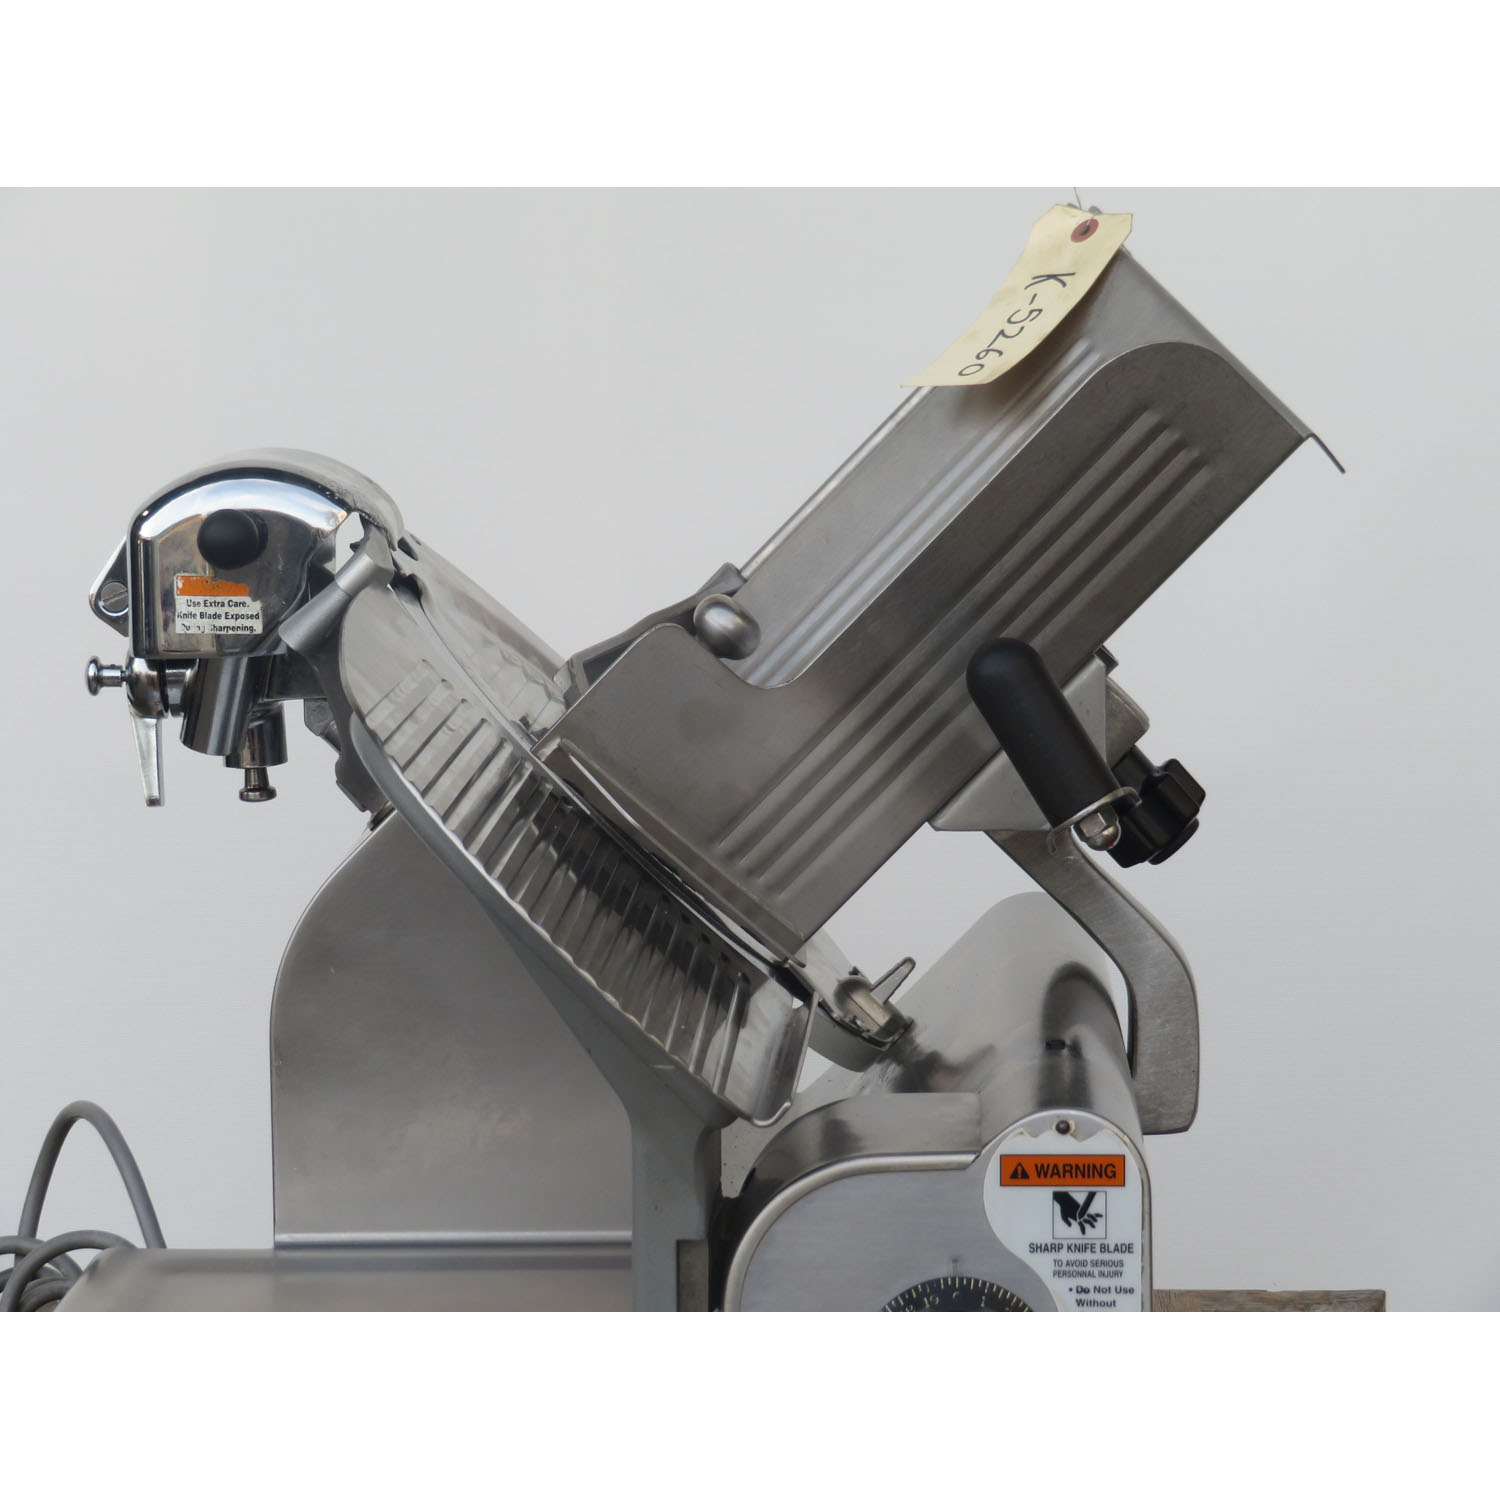 Globe 3600 Meat Slicer, Used Great Condition image 2